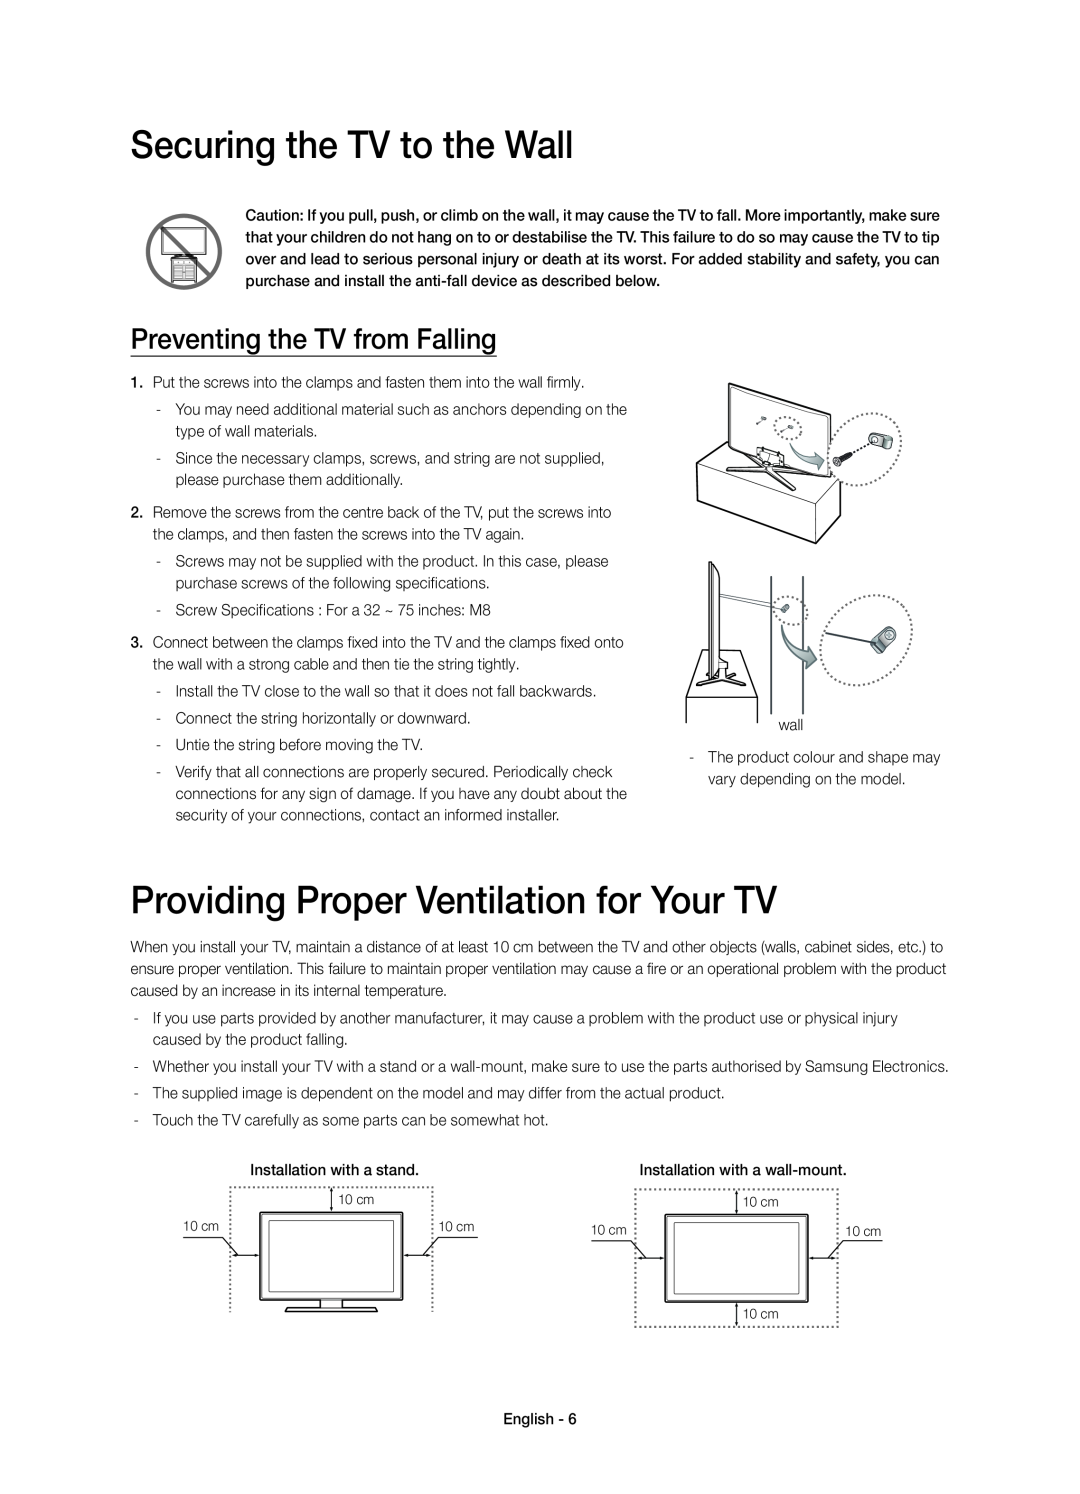 Samsung UE65H6400AWXXC, UE48H6400AWXXH manual Securing the TV to the Wall, Providing Proper Ventilation for Your TV 